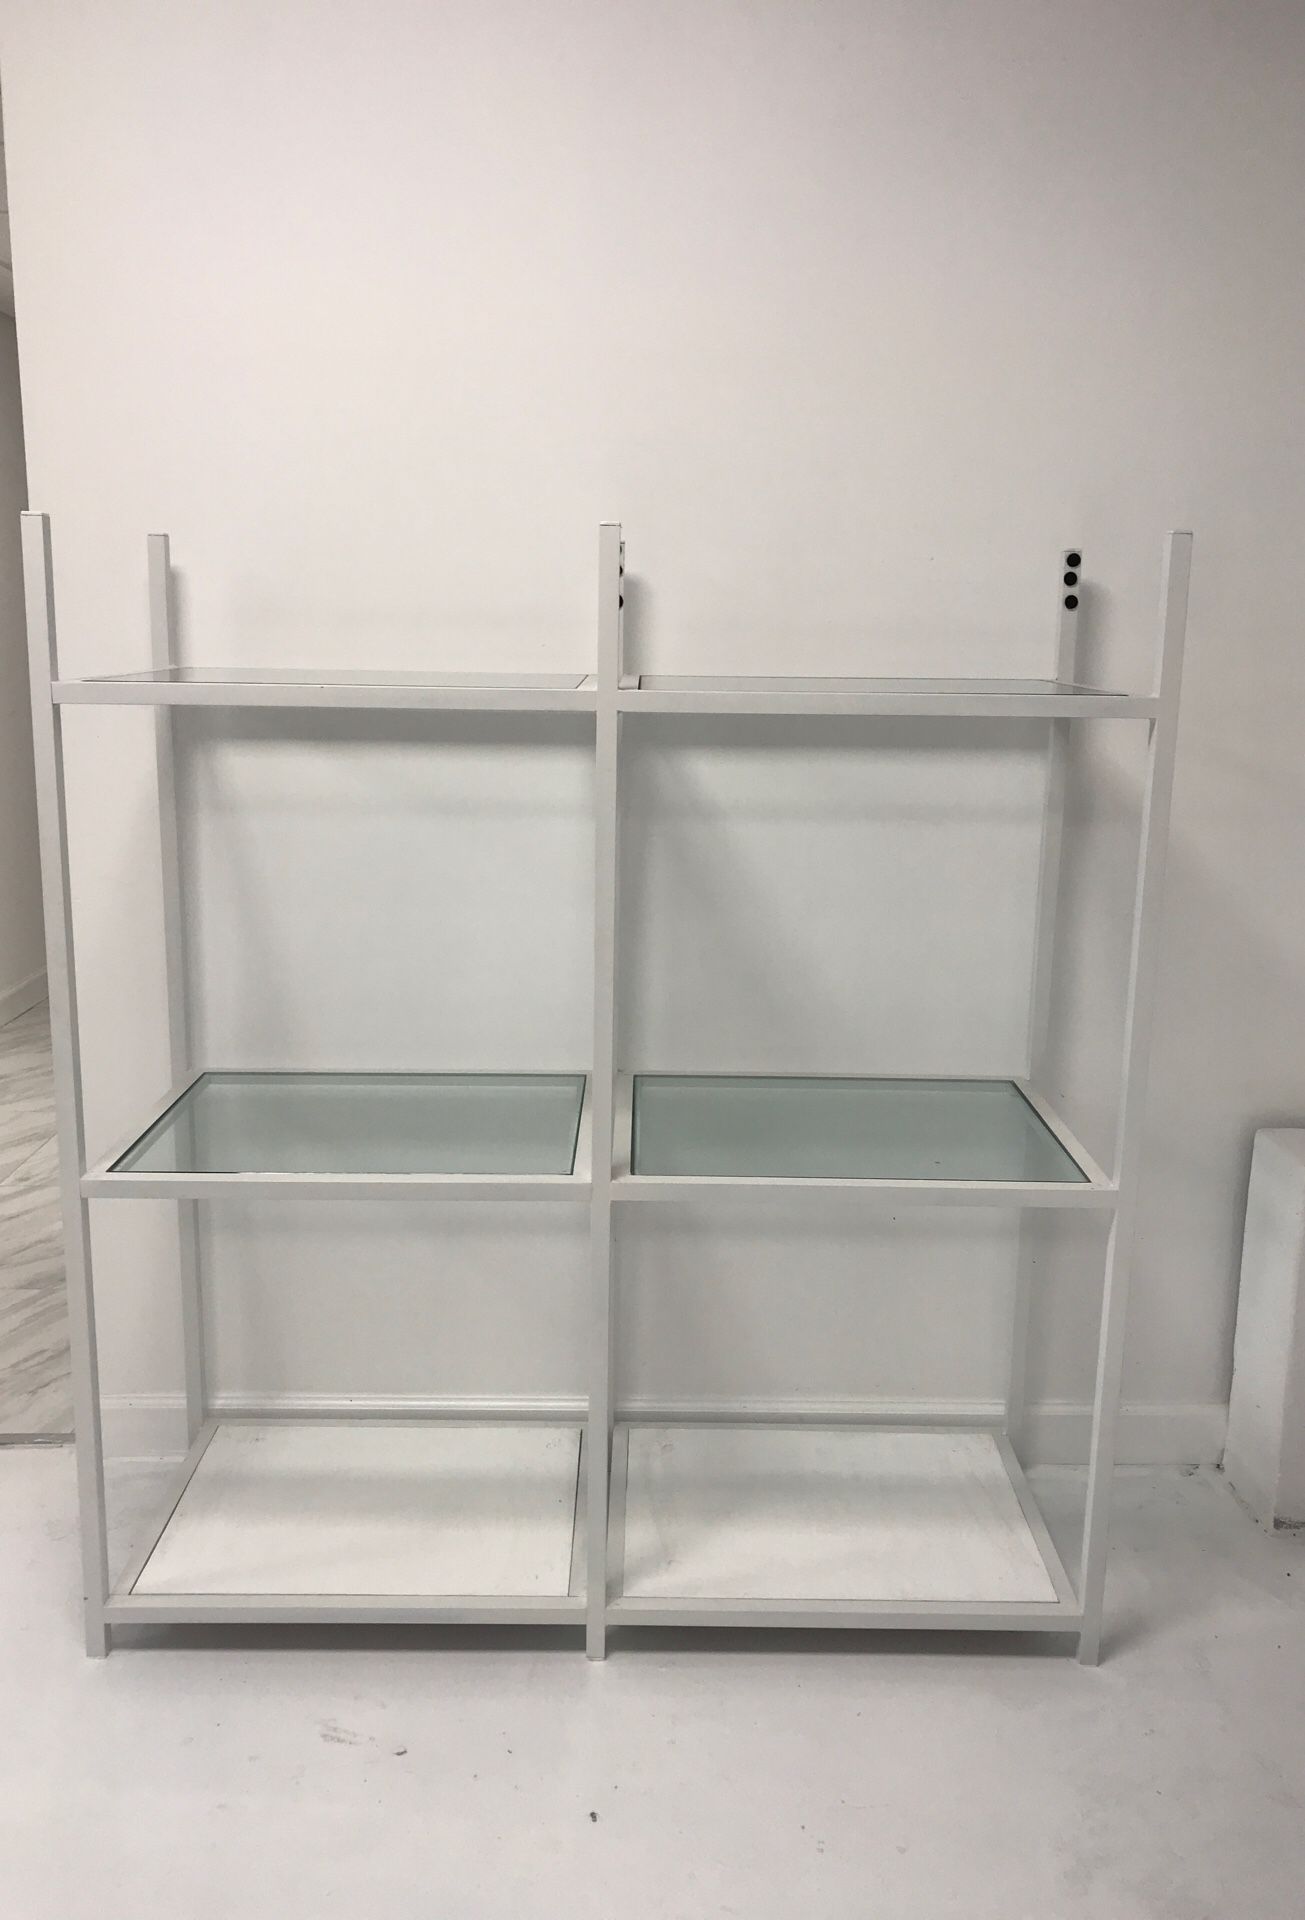 Exhibitor shelving unit - Store closing Sale- everything must go Herval Furniture 2650 NE 189St Aventura 33180